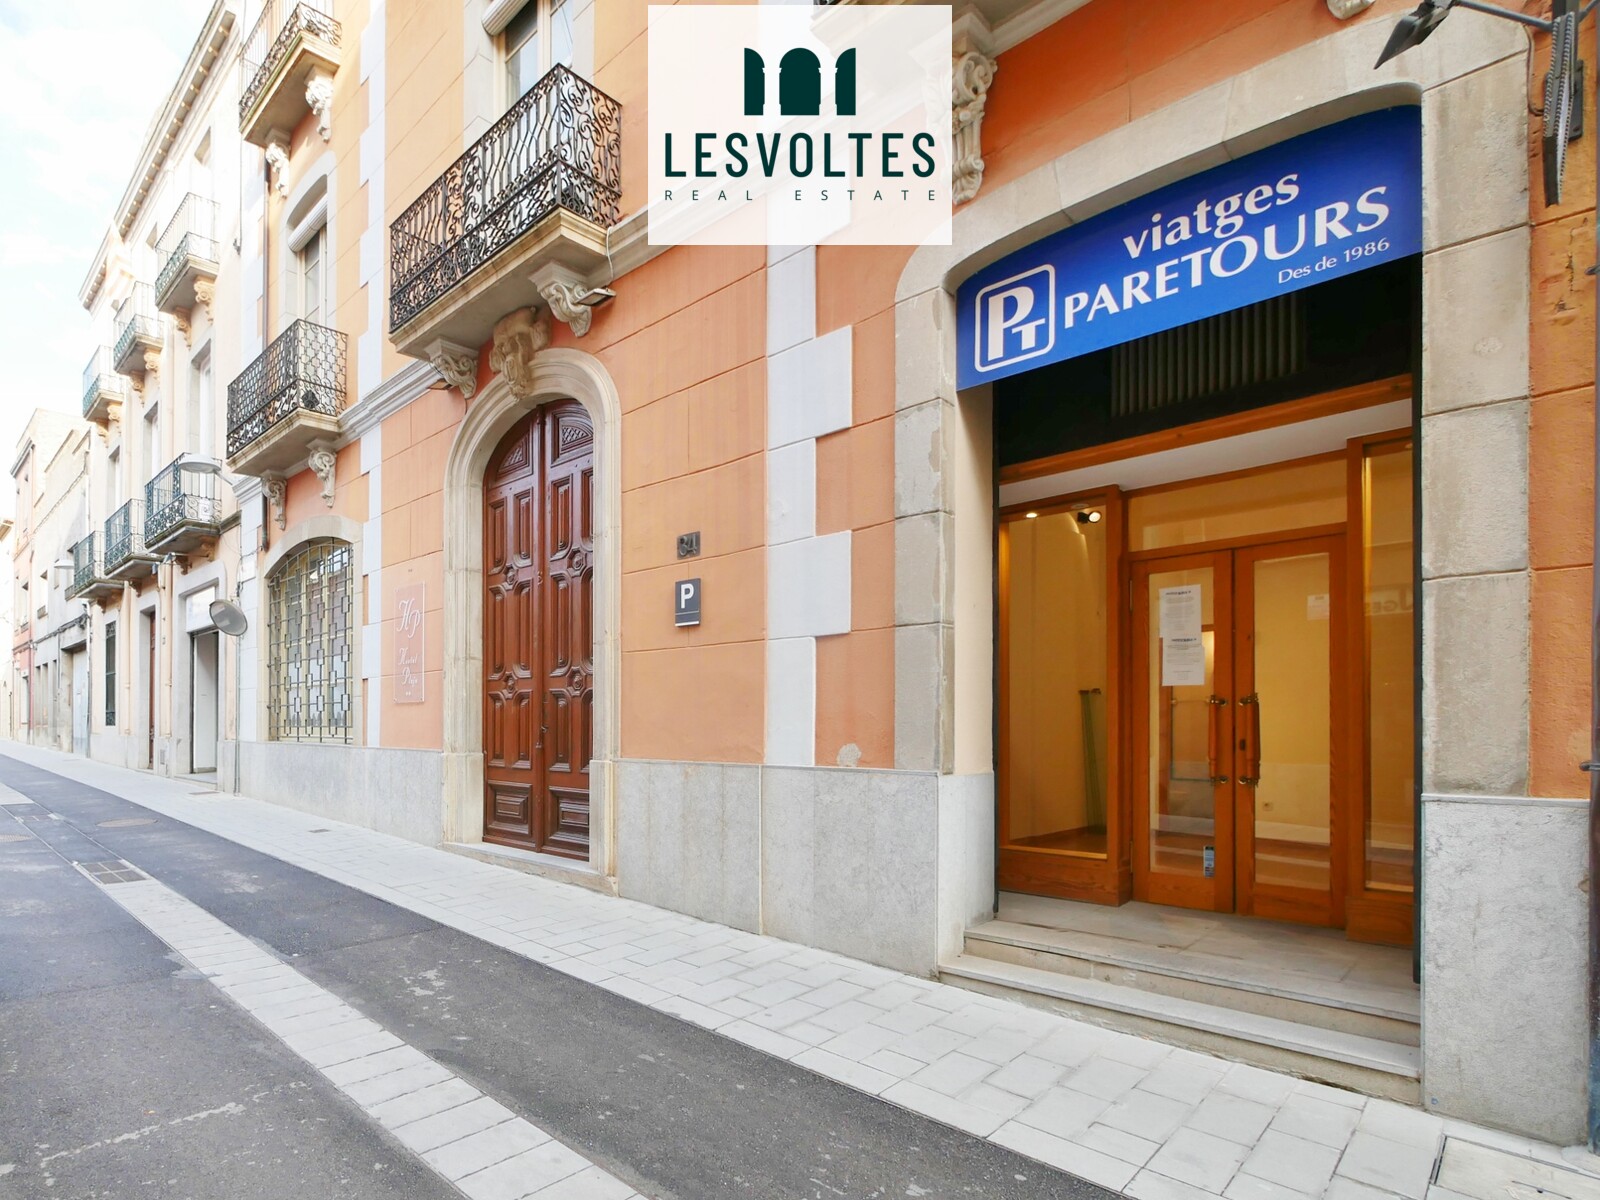 Fully open commercial premises for rent in the center of Palafrugell.